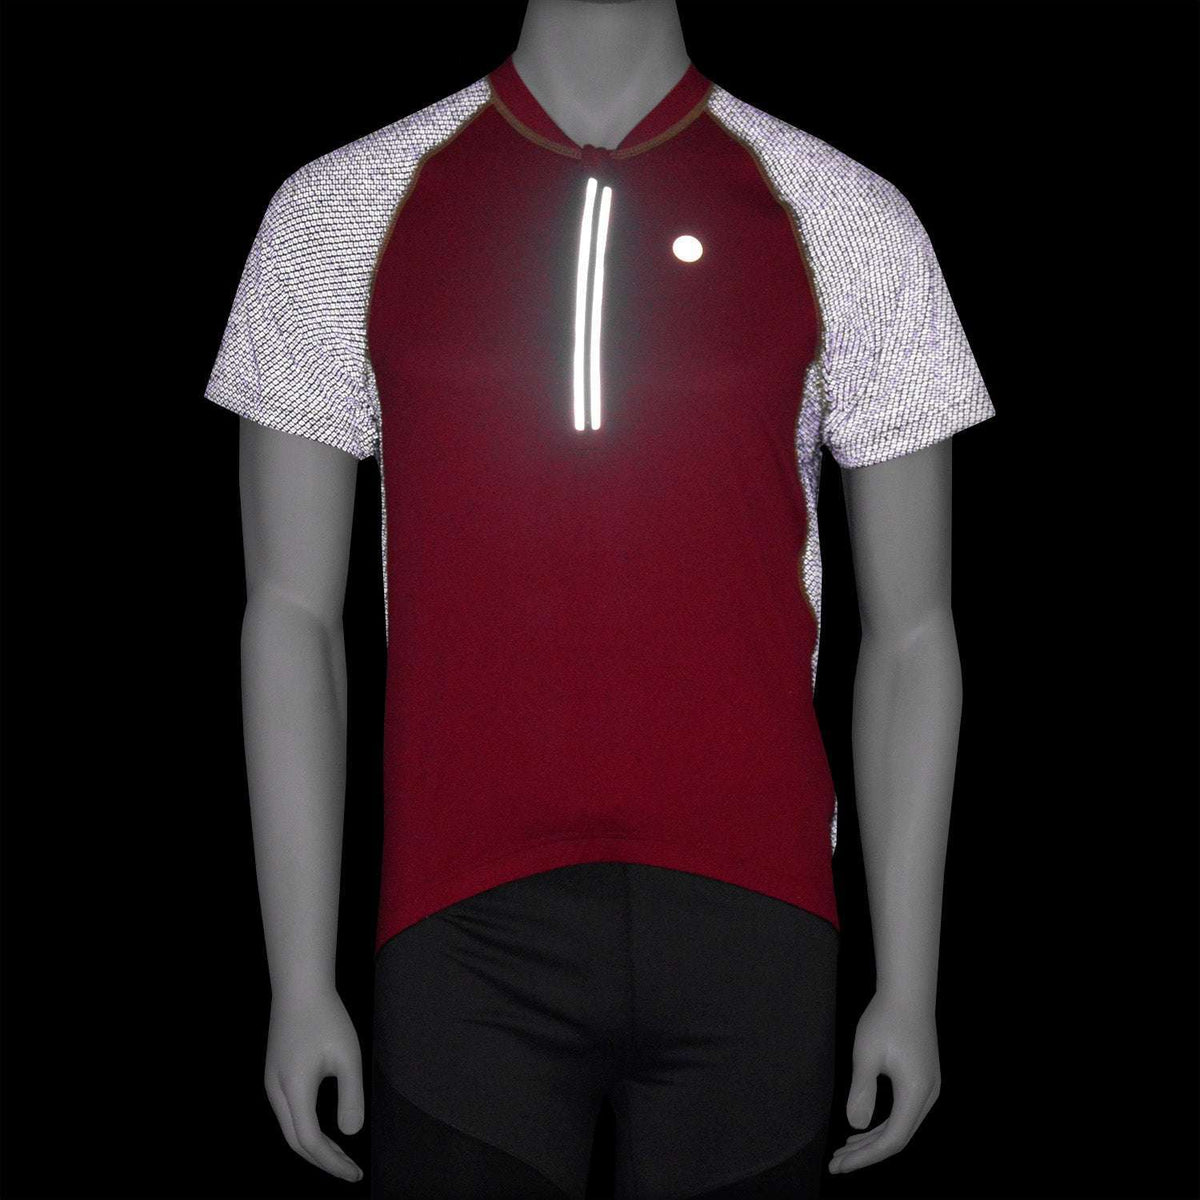 raceLITE Men's Reflective Cycling Jersey in Red / Black